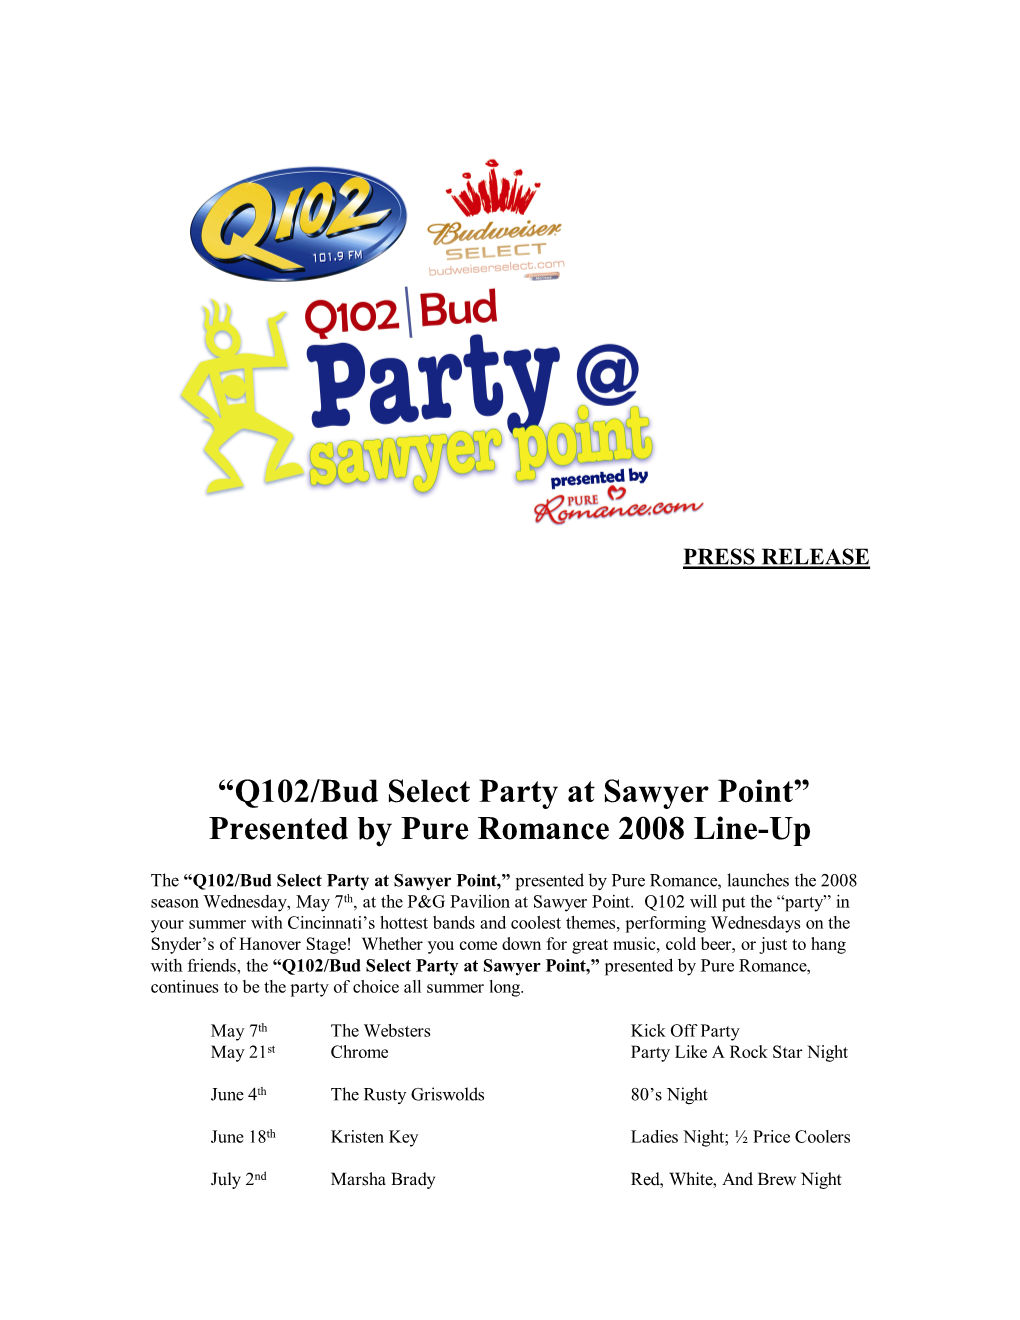 Q102/Bud Select Party at Sawyer Point” Presented by Pure Romance 2008 Line-Up